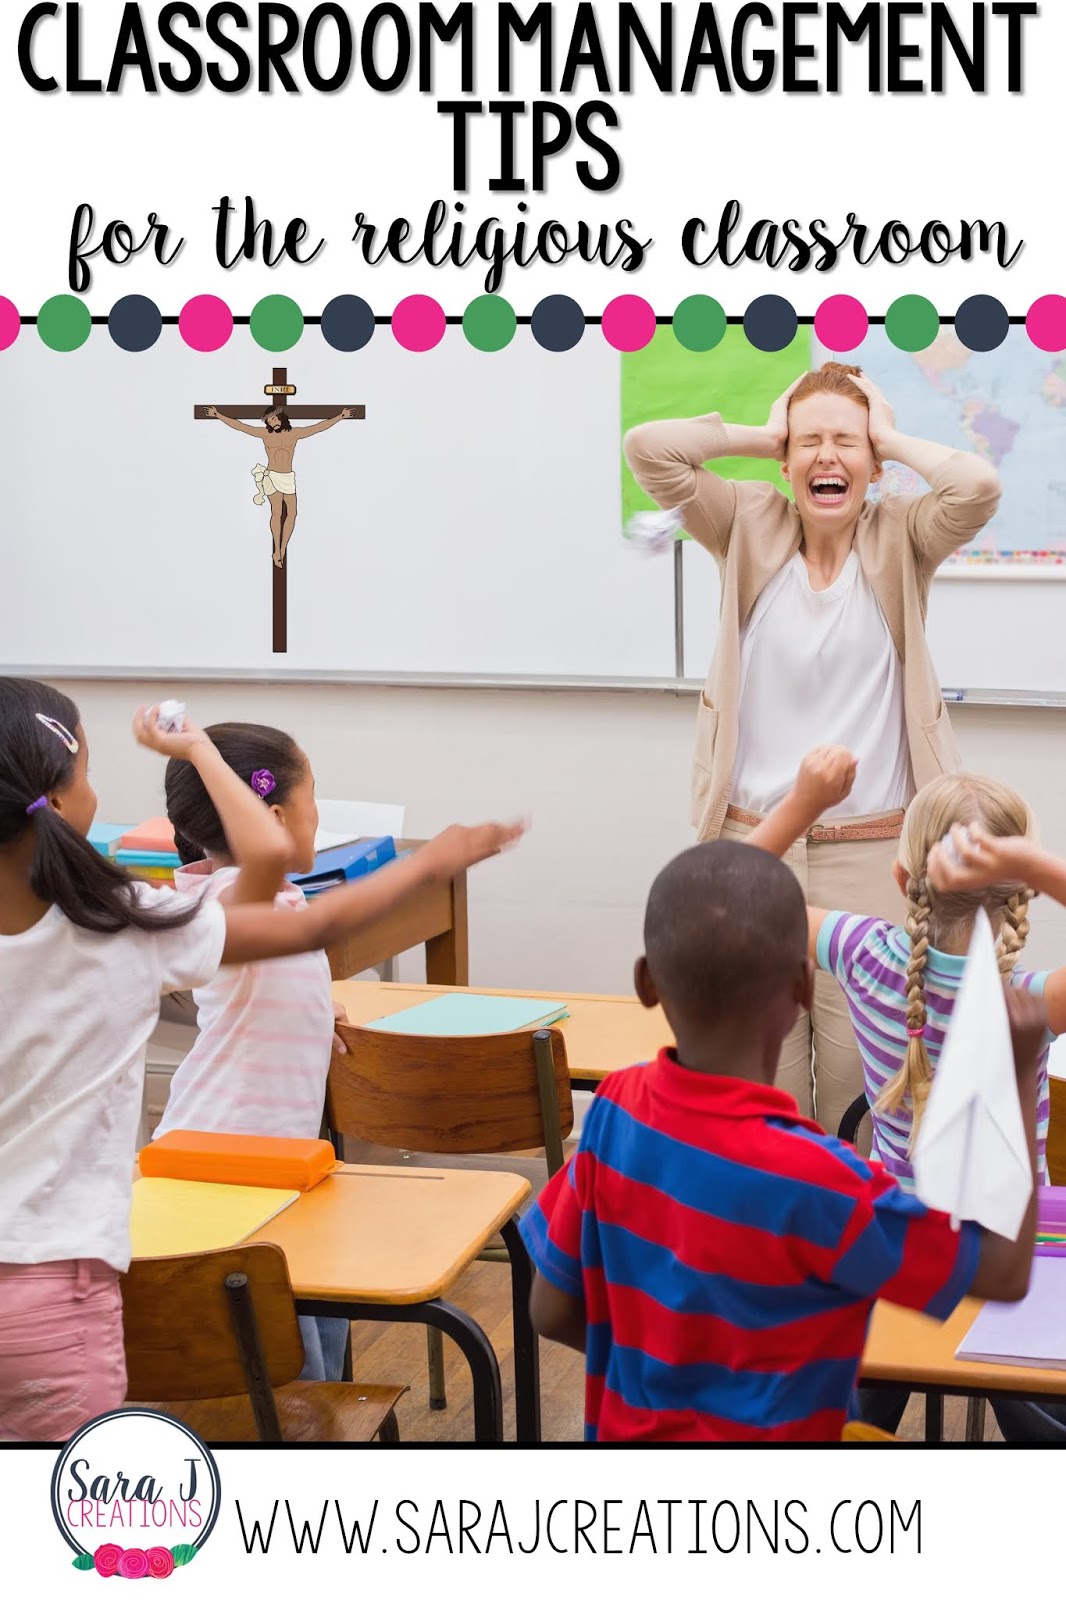 Do you teach in a Sunday school, religious education, catechism class or religious formation environment? Could you use some help with classroom management to help keep your classroom positive and on task? Check out these tips for classroom management in a religious classroom. Specifically written for volunteers who are teaching the faith to our kids, but don't necessarily have the teaching background to give them strategies for dealing with behavior problems in their classroom.